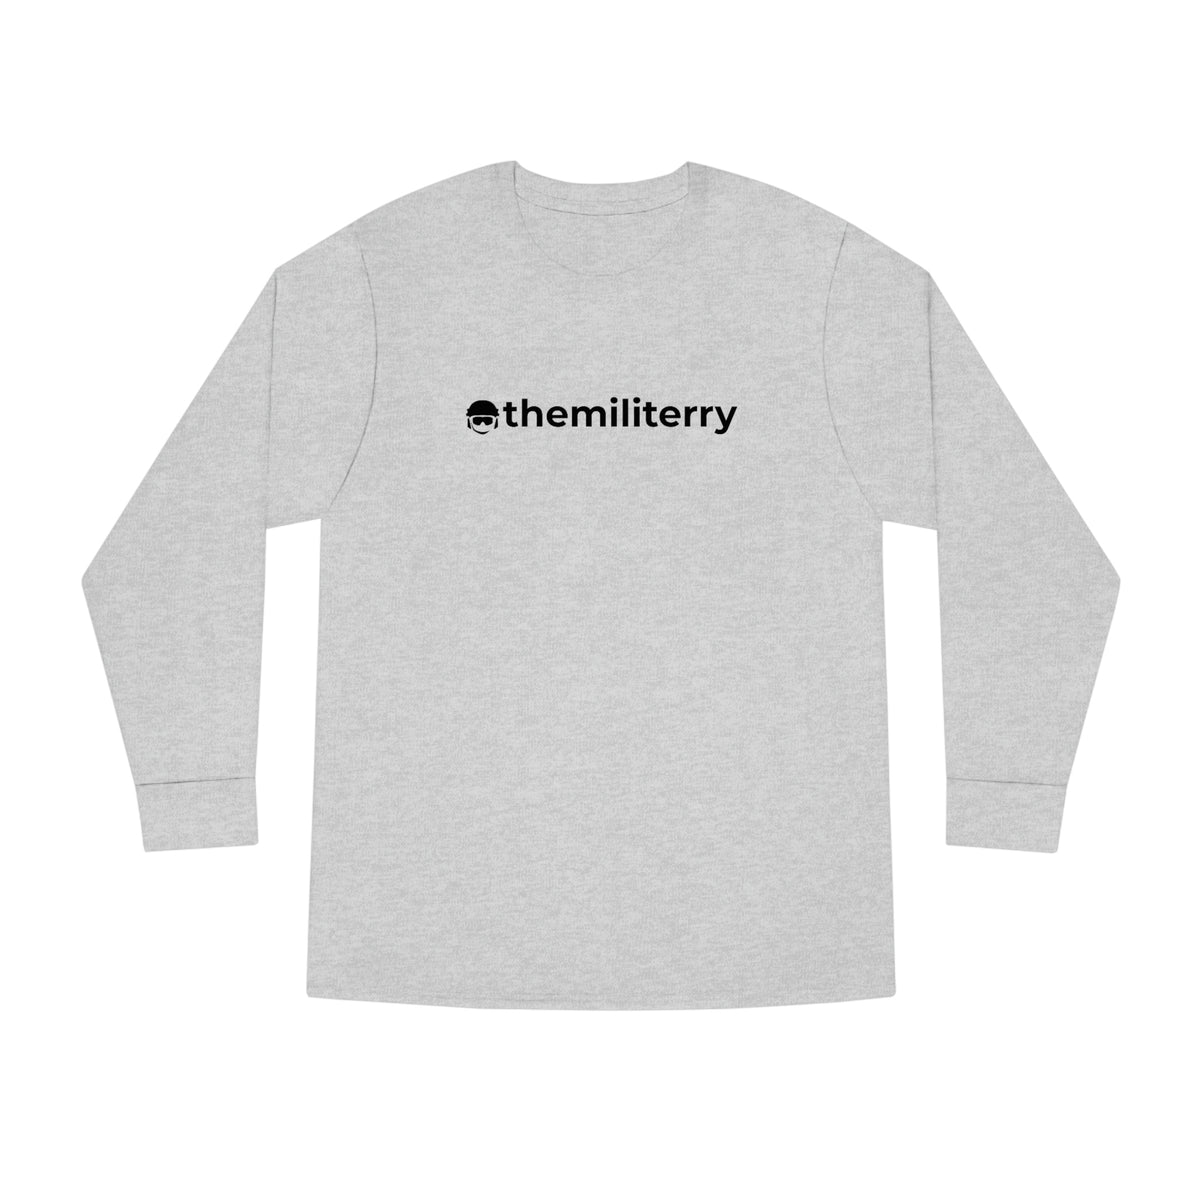 @themiliterry - Long Sleeve Cotton Tee